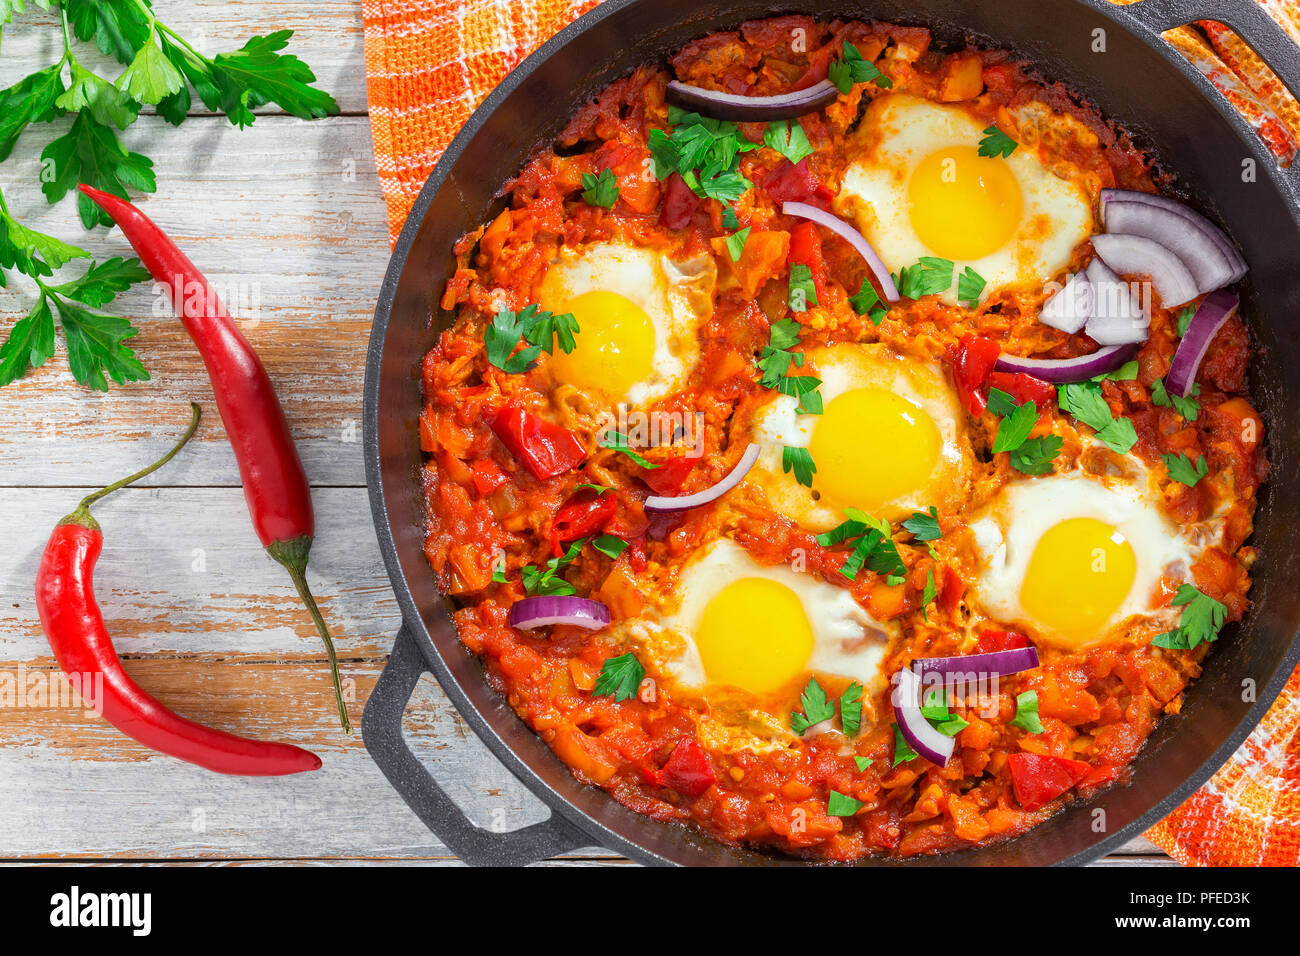 Healthy Breakfast Shakshuka Fried Eggs Onion Bell Pepper Tomatoes Chili And Spices In Iron Pan With Kitchen Towel Parsley On White Wooden Plank Stock Photo Alamy